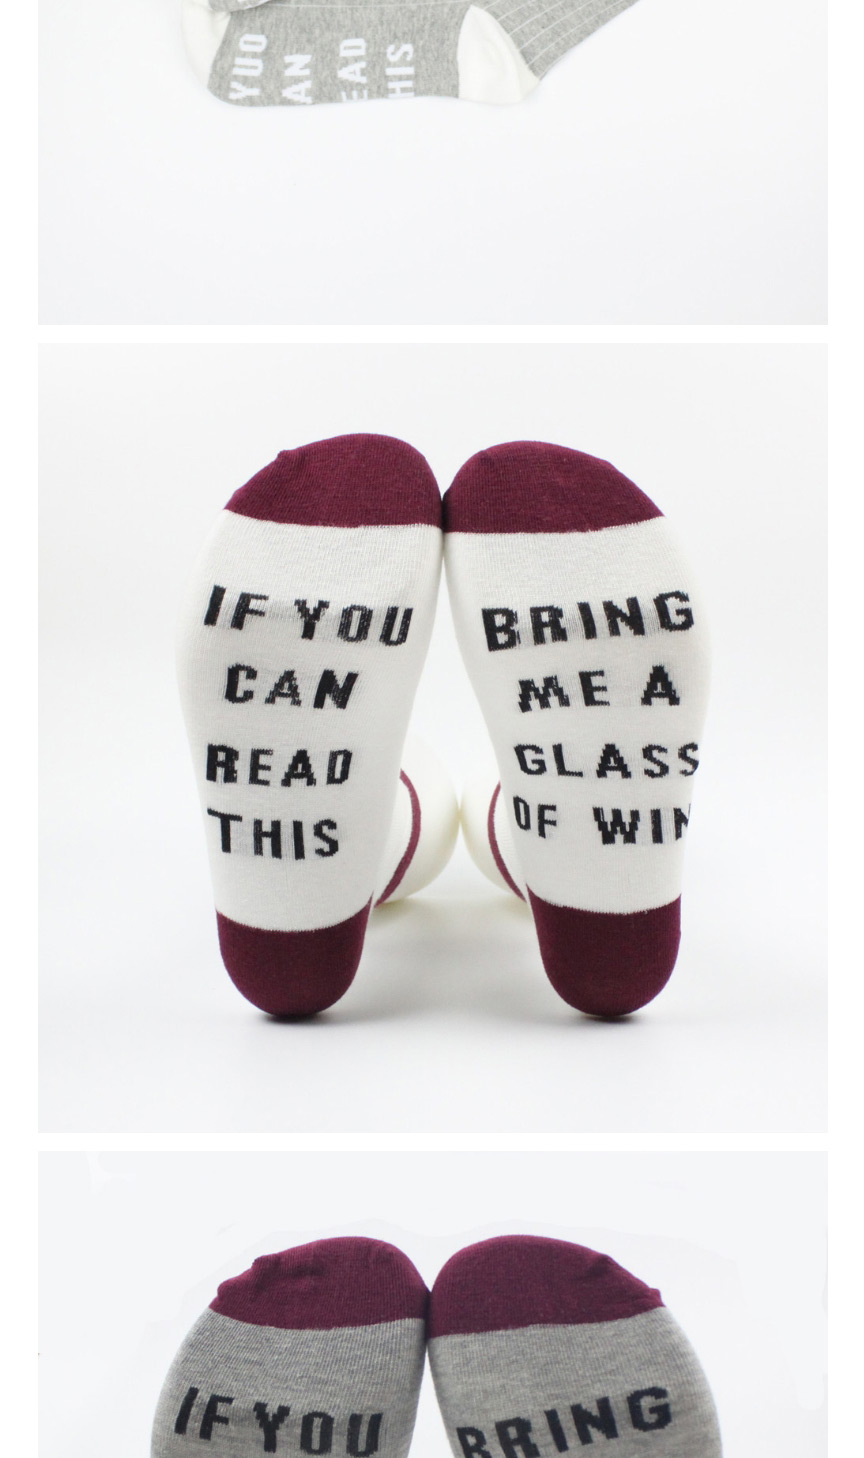 Fashion Milky White Wine Red Plantar Letters Hit The Color In The Tube Pile Pile Socks,Fashion Socks